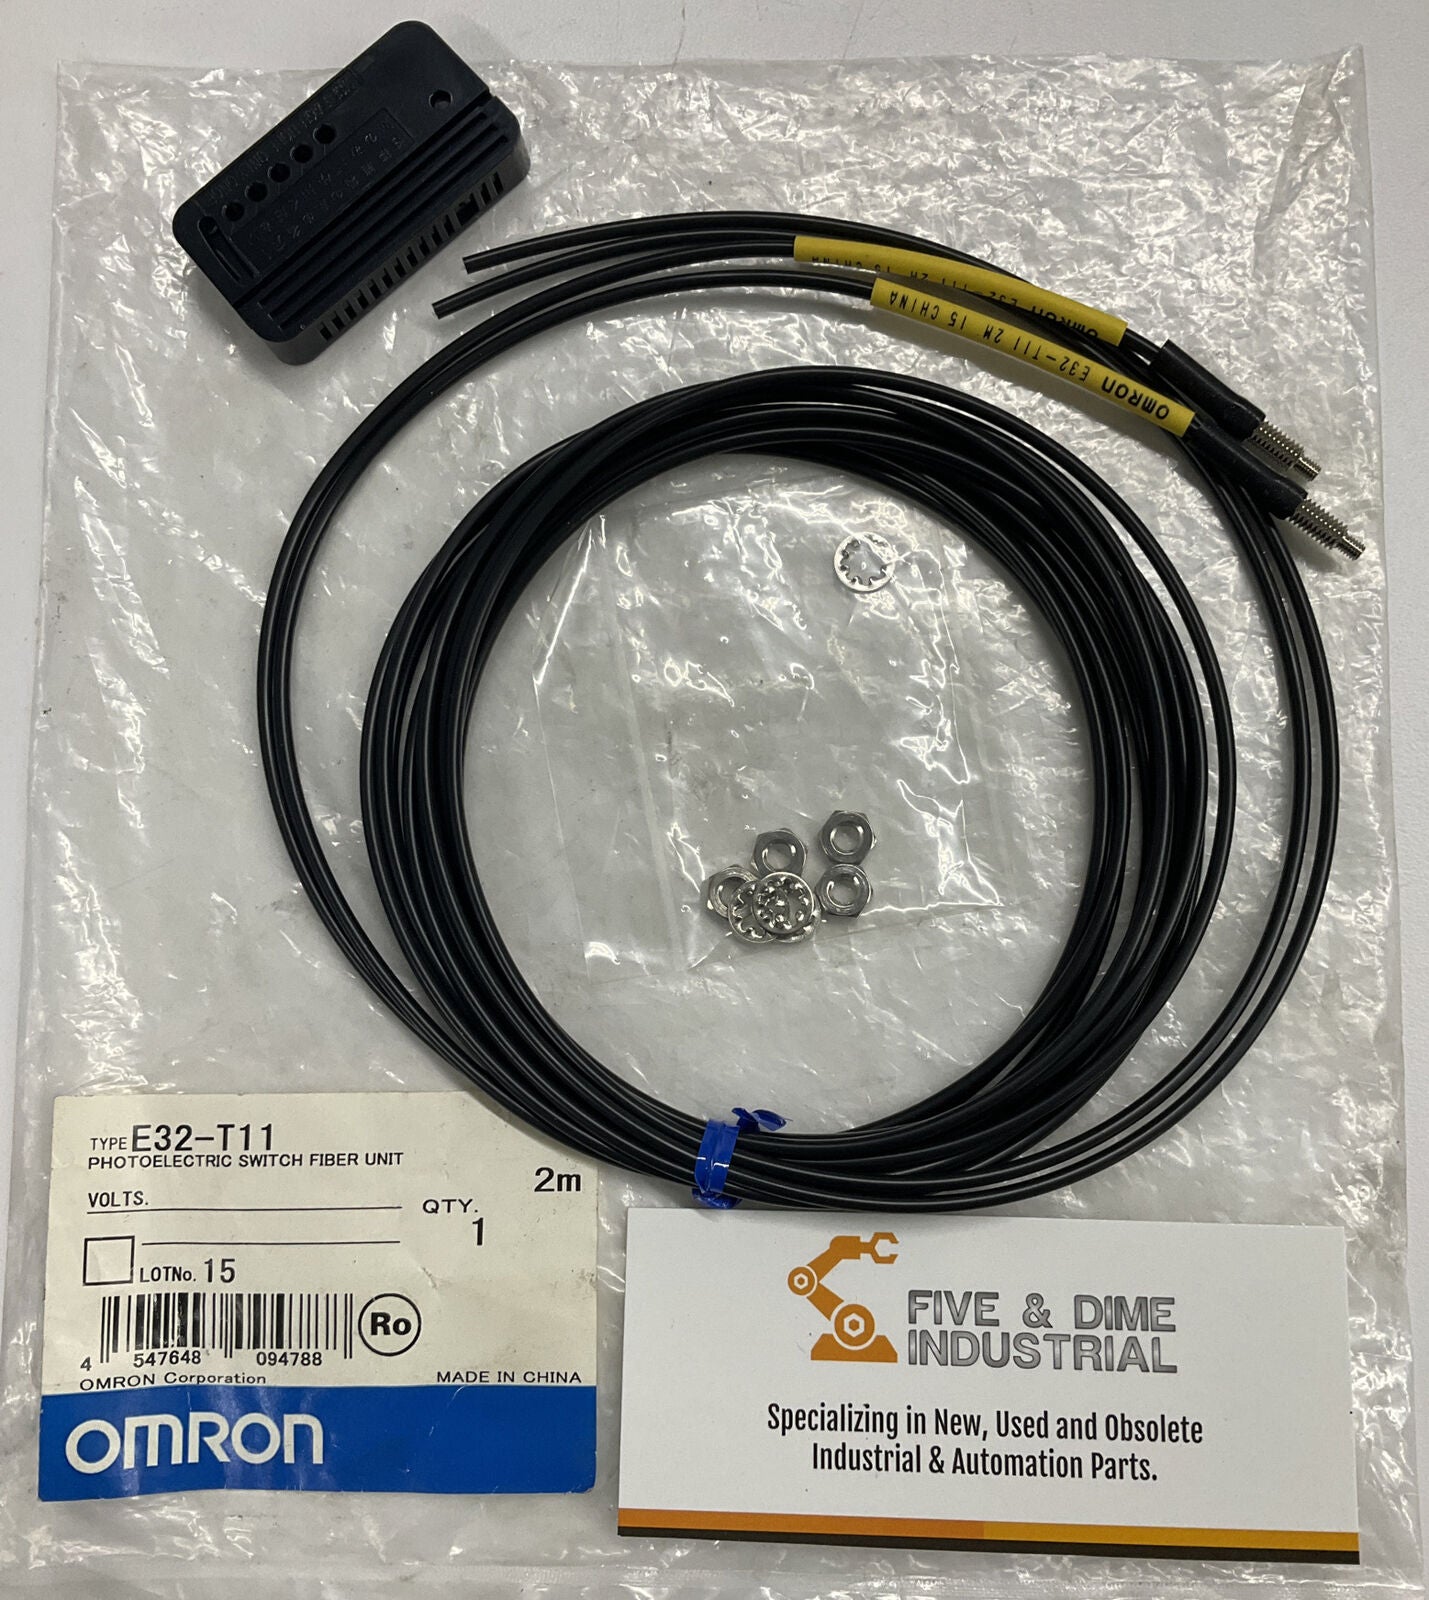 Omron E32-T11 New Photoelectric Switch Fiber Unit 2-Meters (BL230)